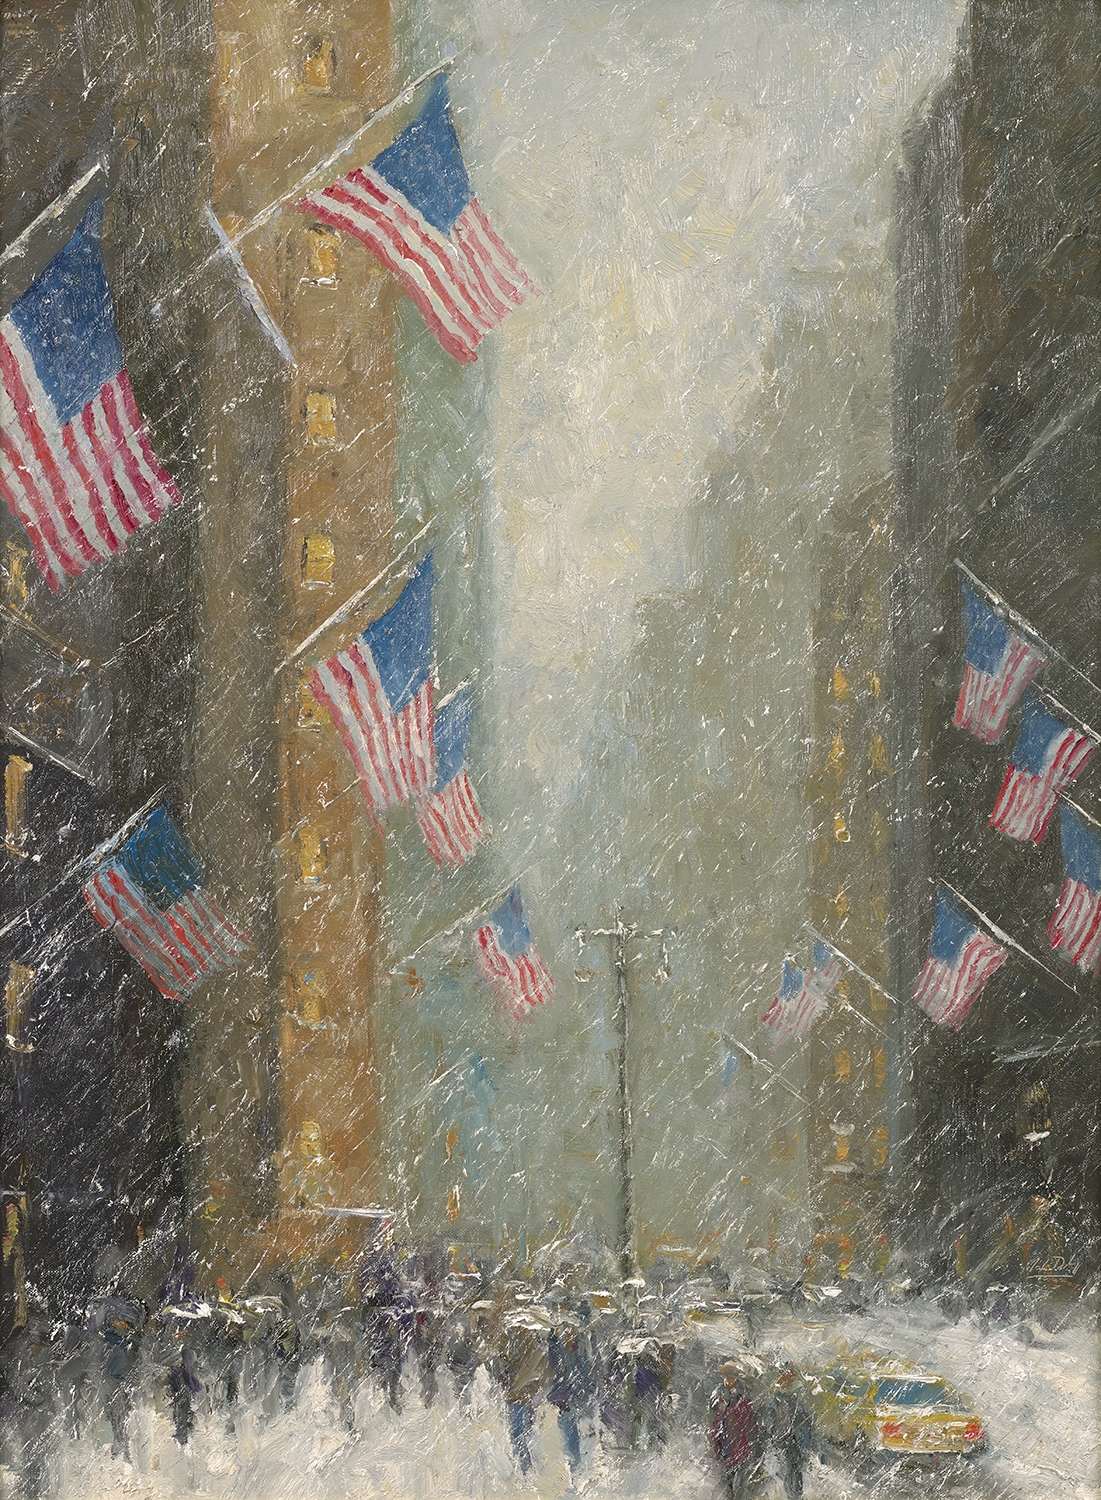 mark_daly_md1095_flags_along_the_avenue.jpg